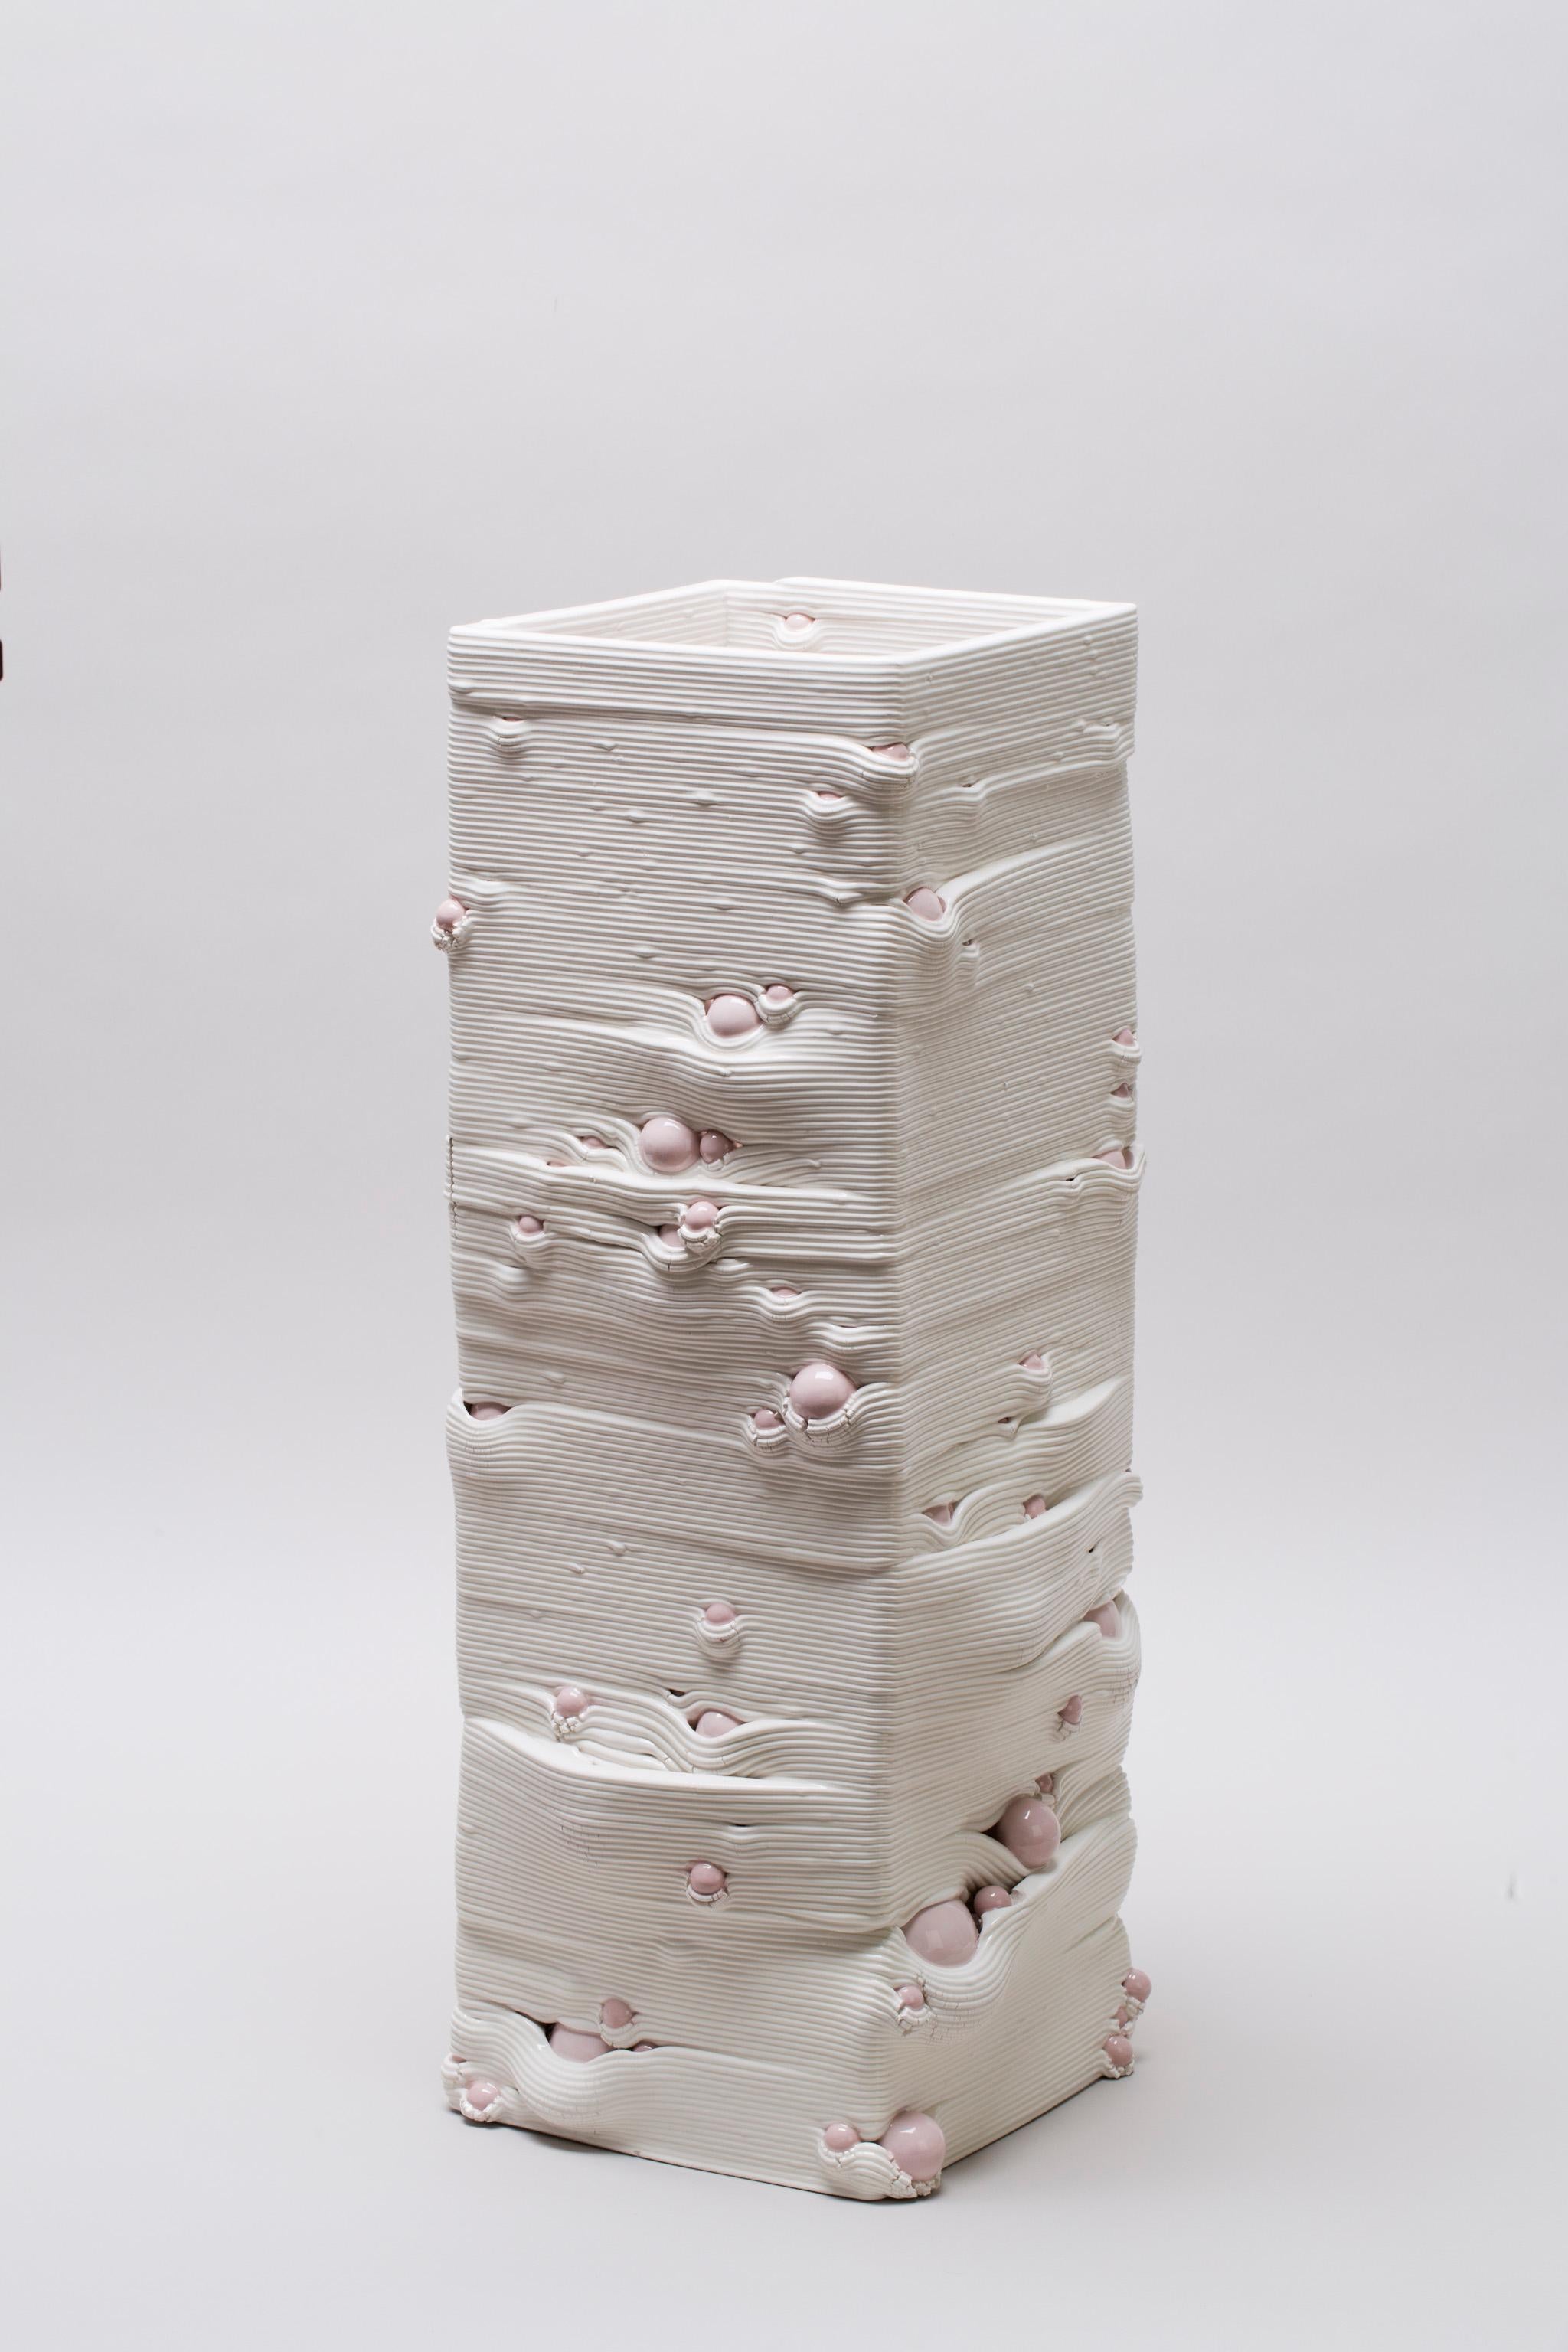 Glazed White 3D Printed Ceramic Sculptural Vase Italy Contemporary, 21st Century For Sale